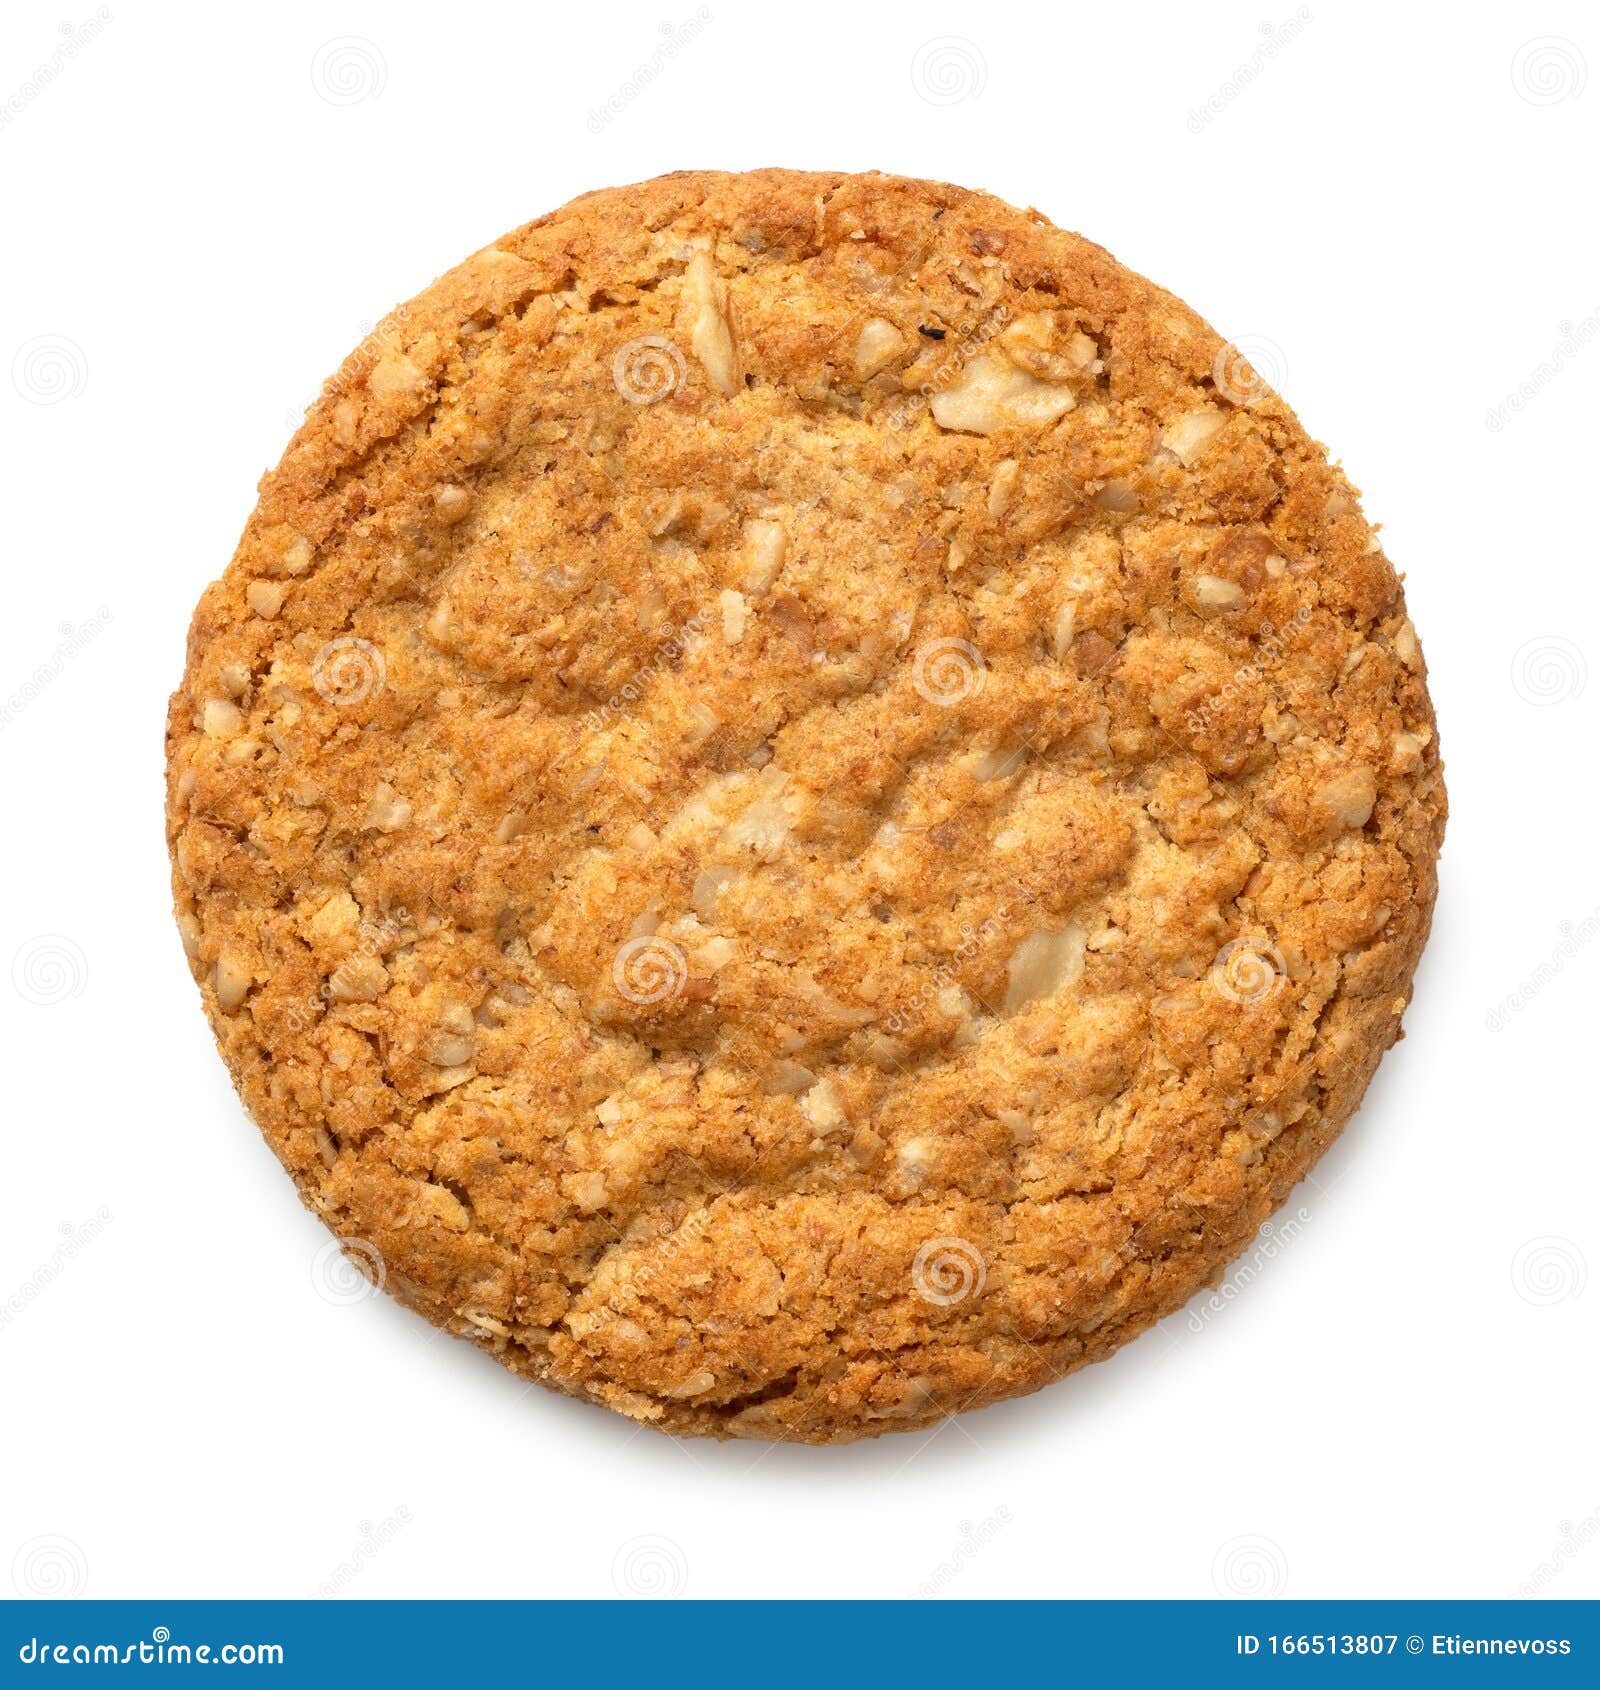 crunchy oat and wholemeal biscuit  on white. top view